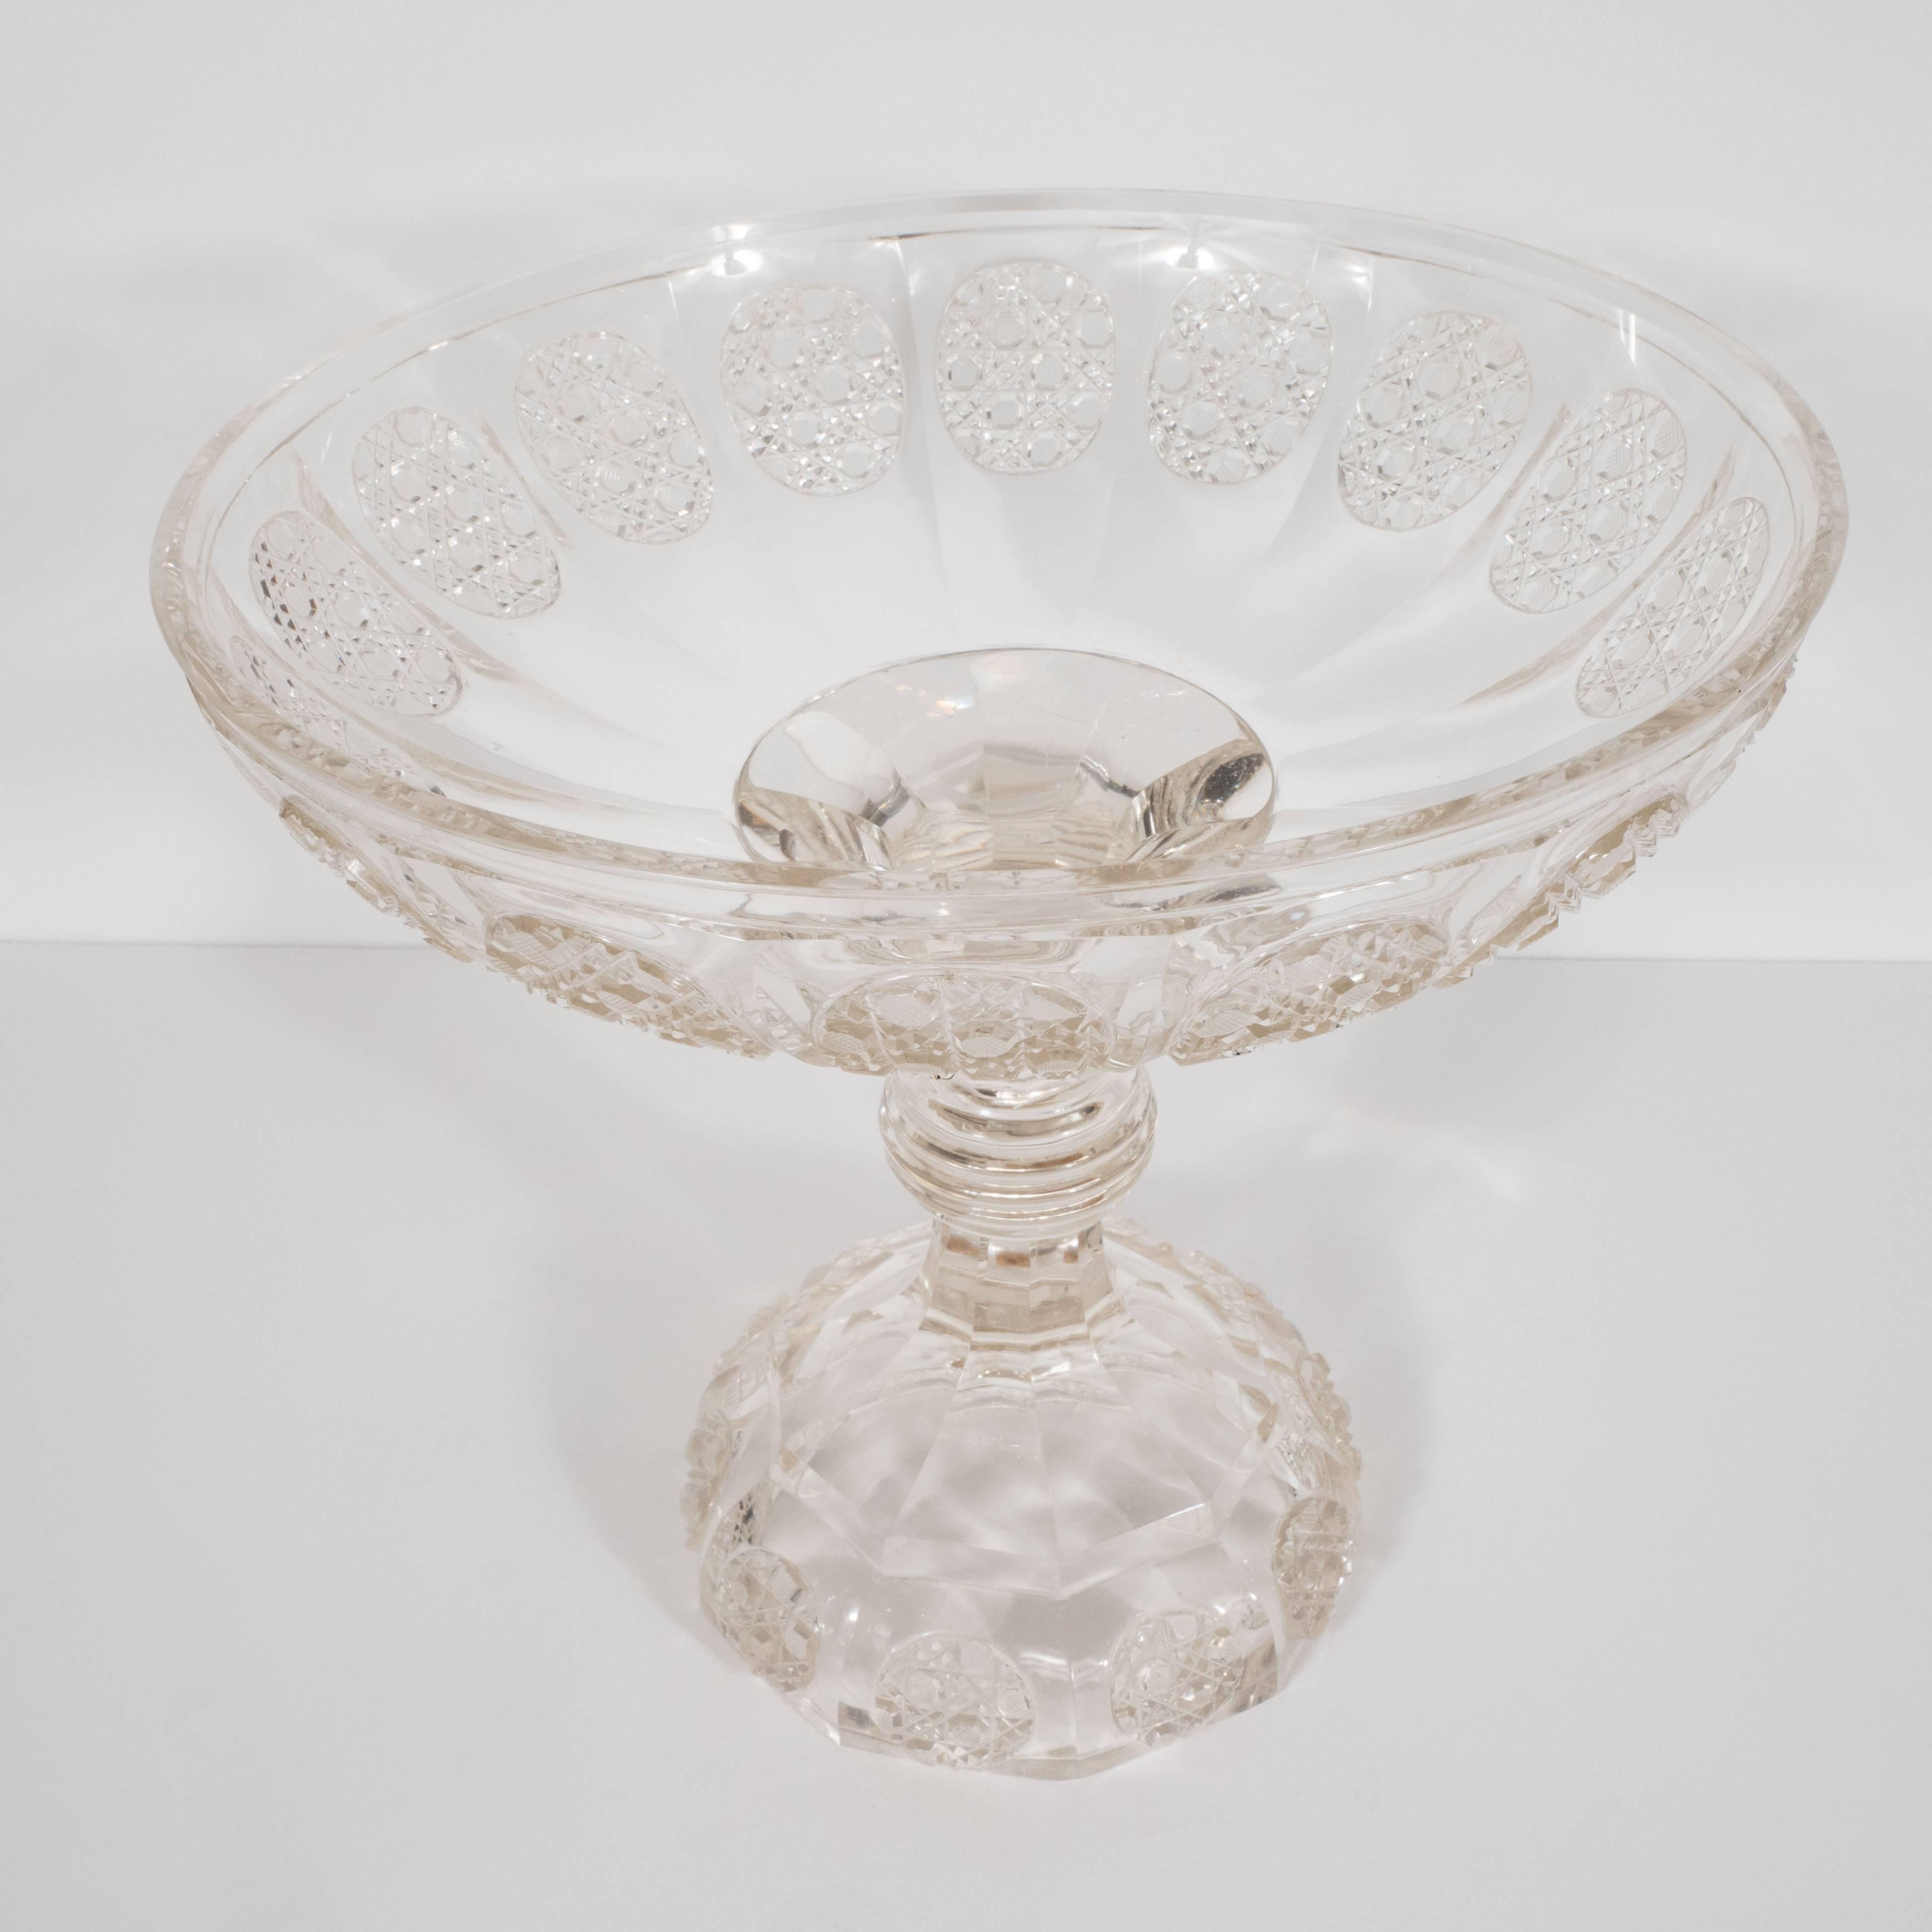 American Art Deco Cut Crystal Footed Bowl with Etched Geometric Designs